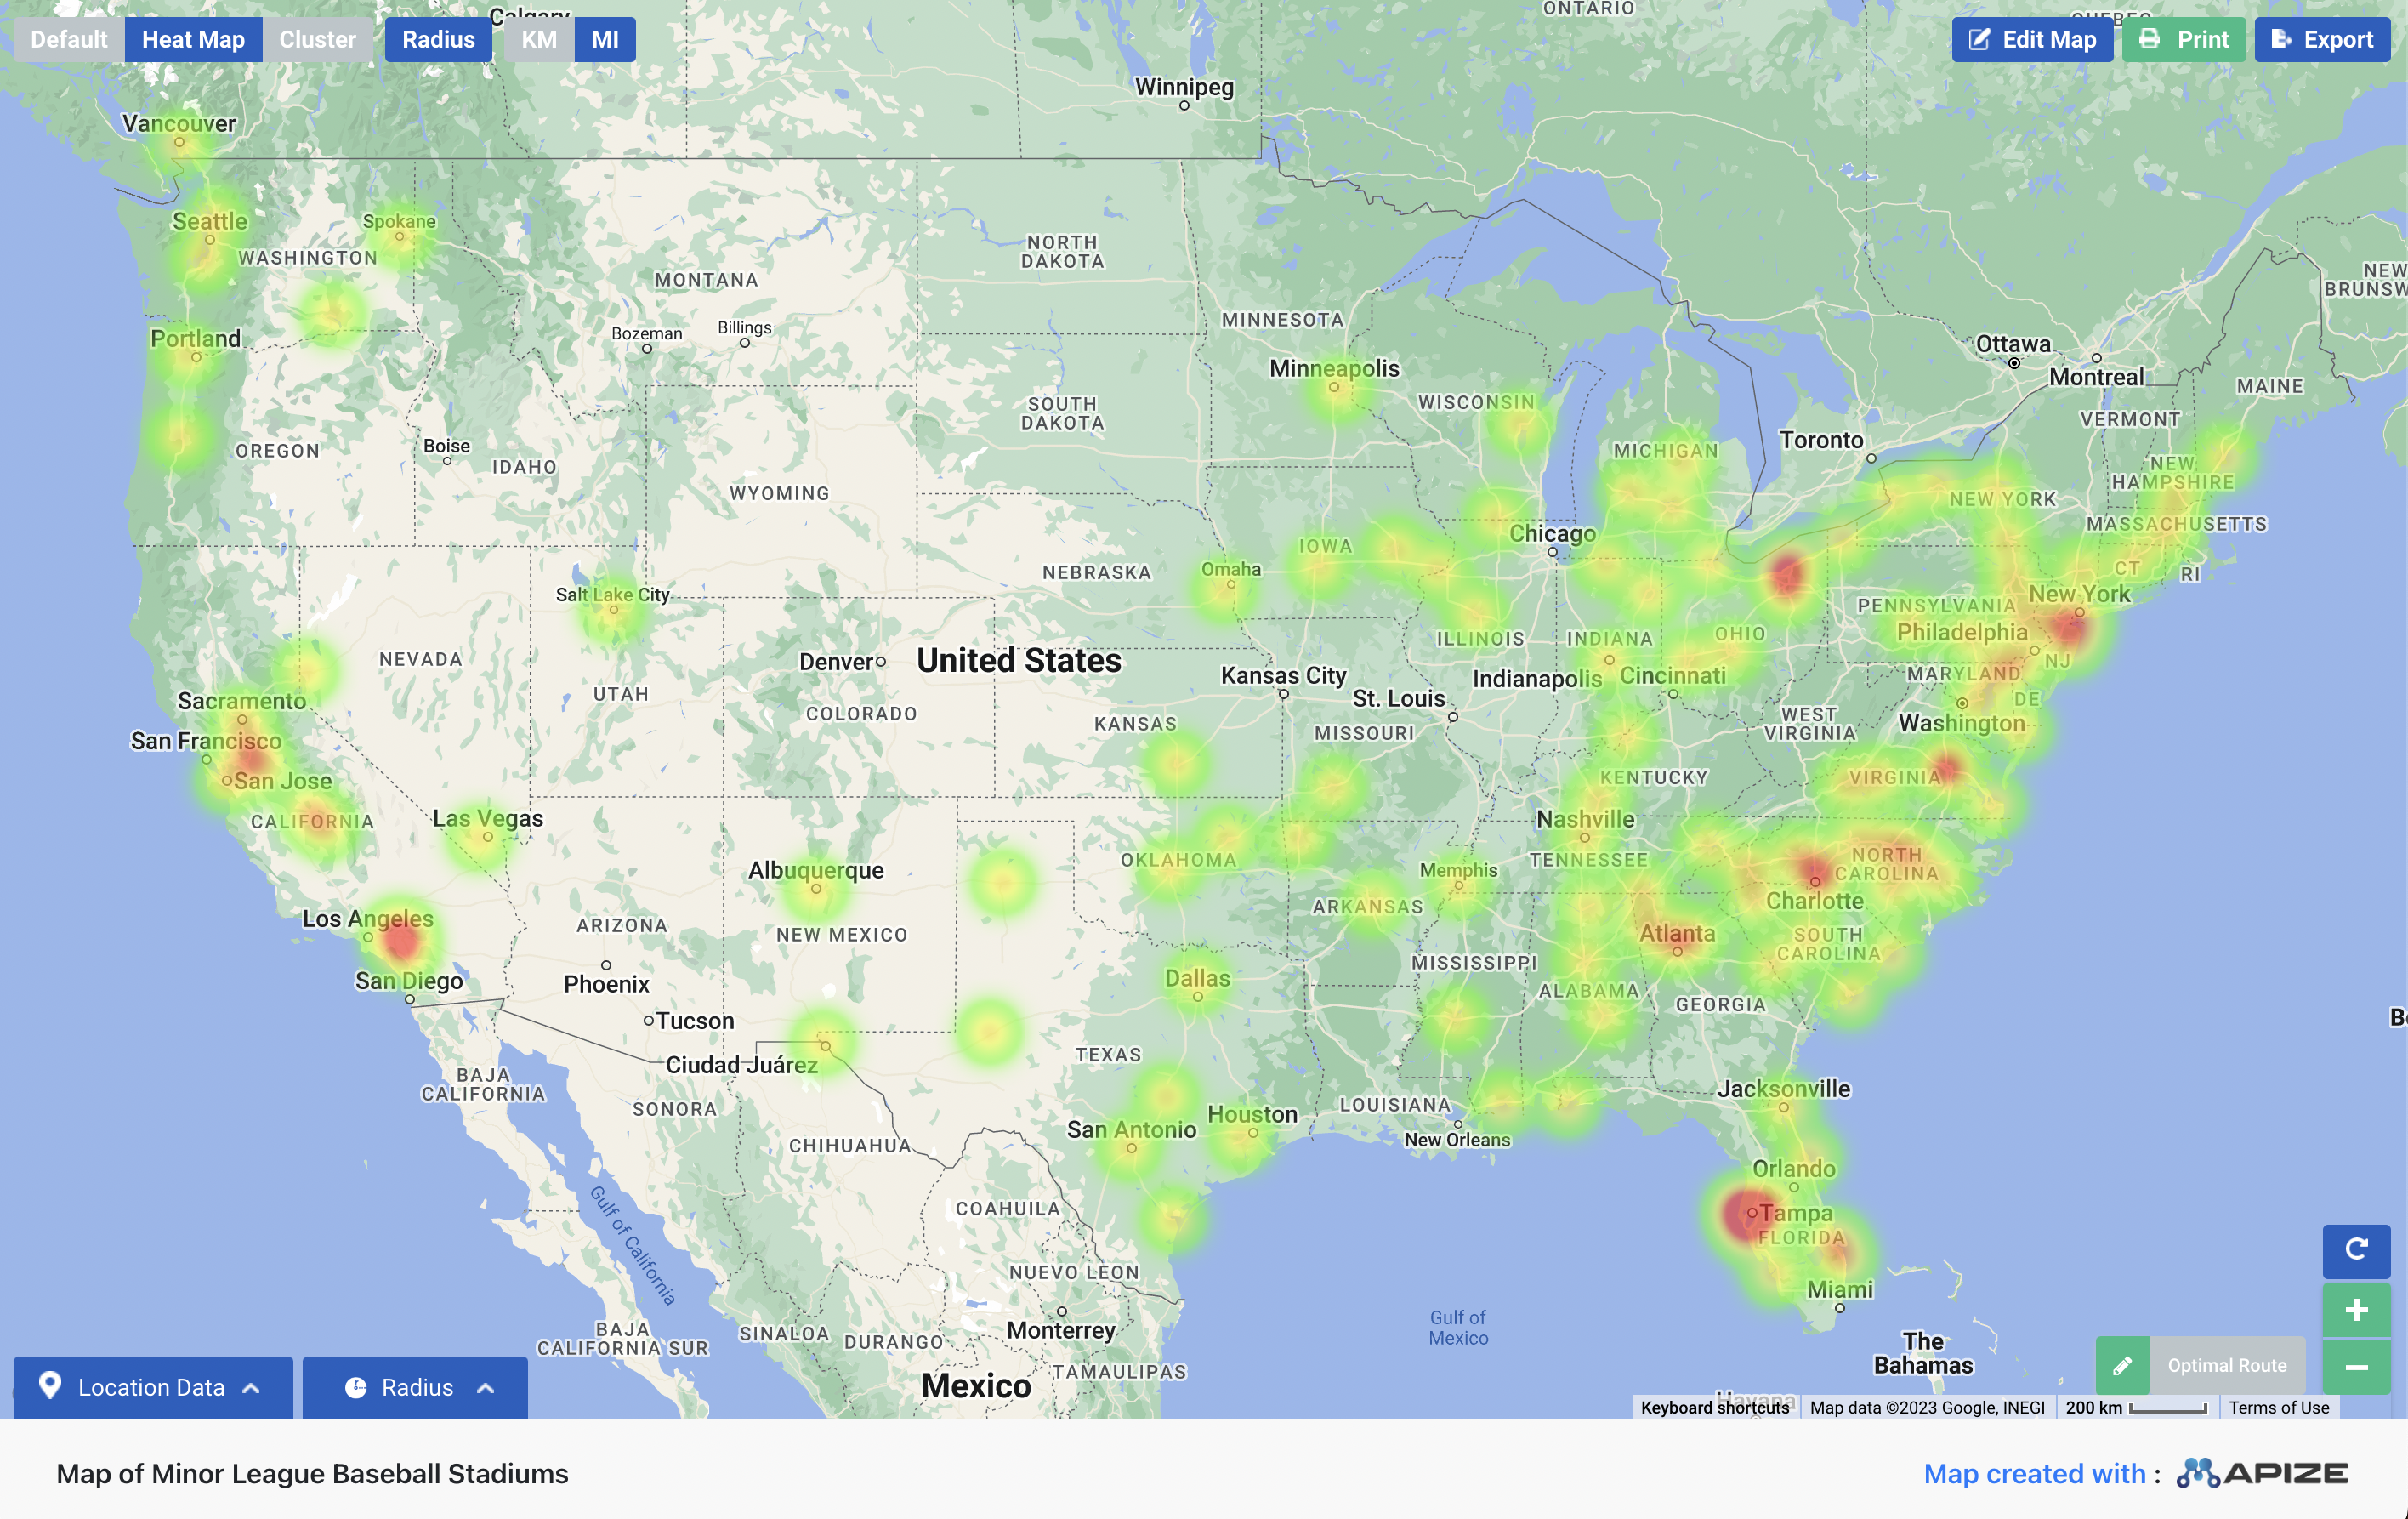 Heat map of the US made by Mapize showing the overall density of minor league baseball stadiums throughout the country.